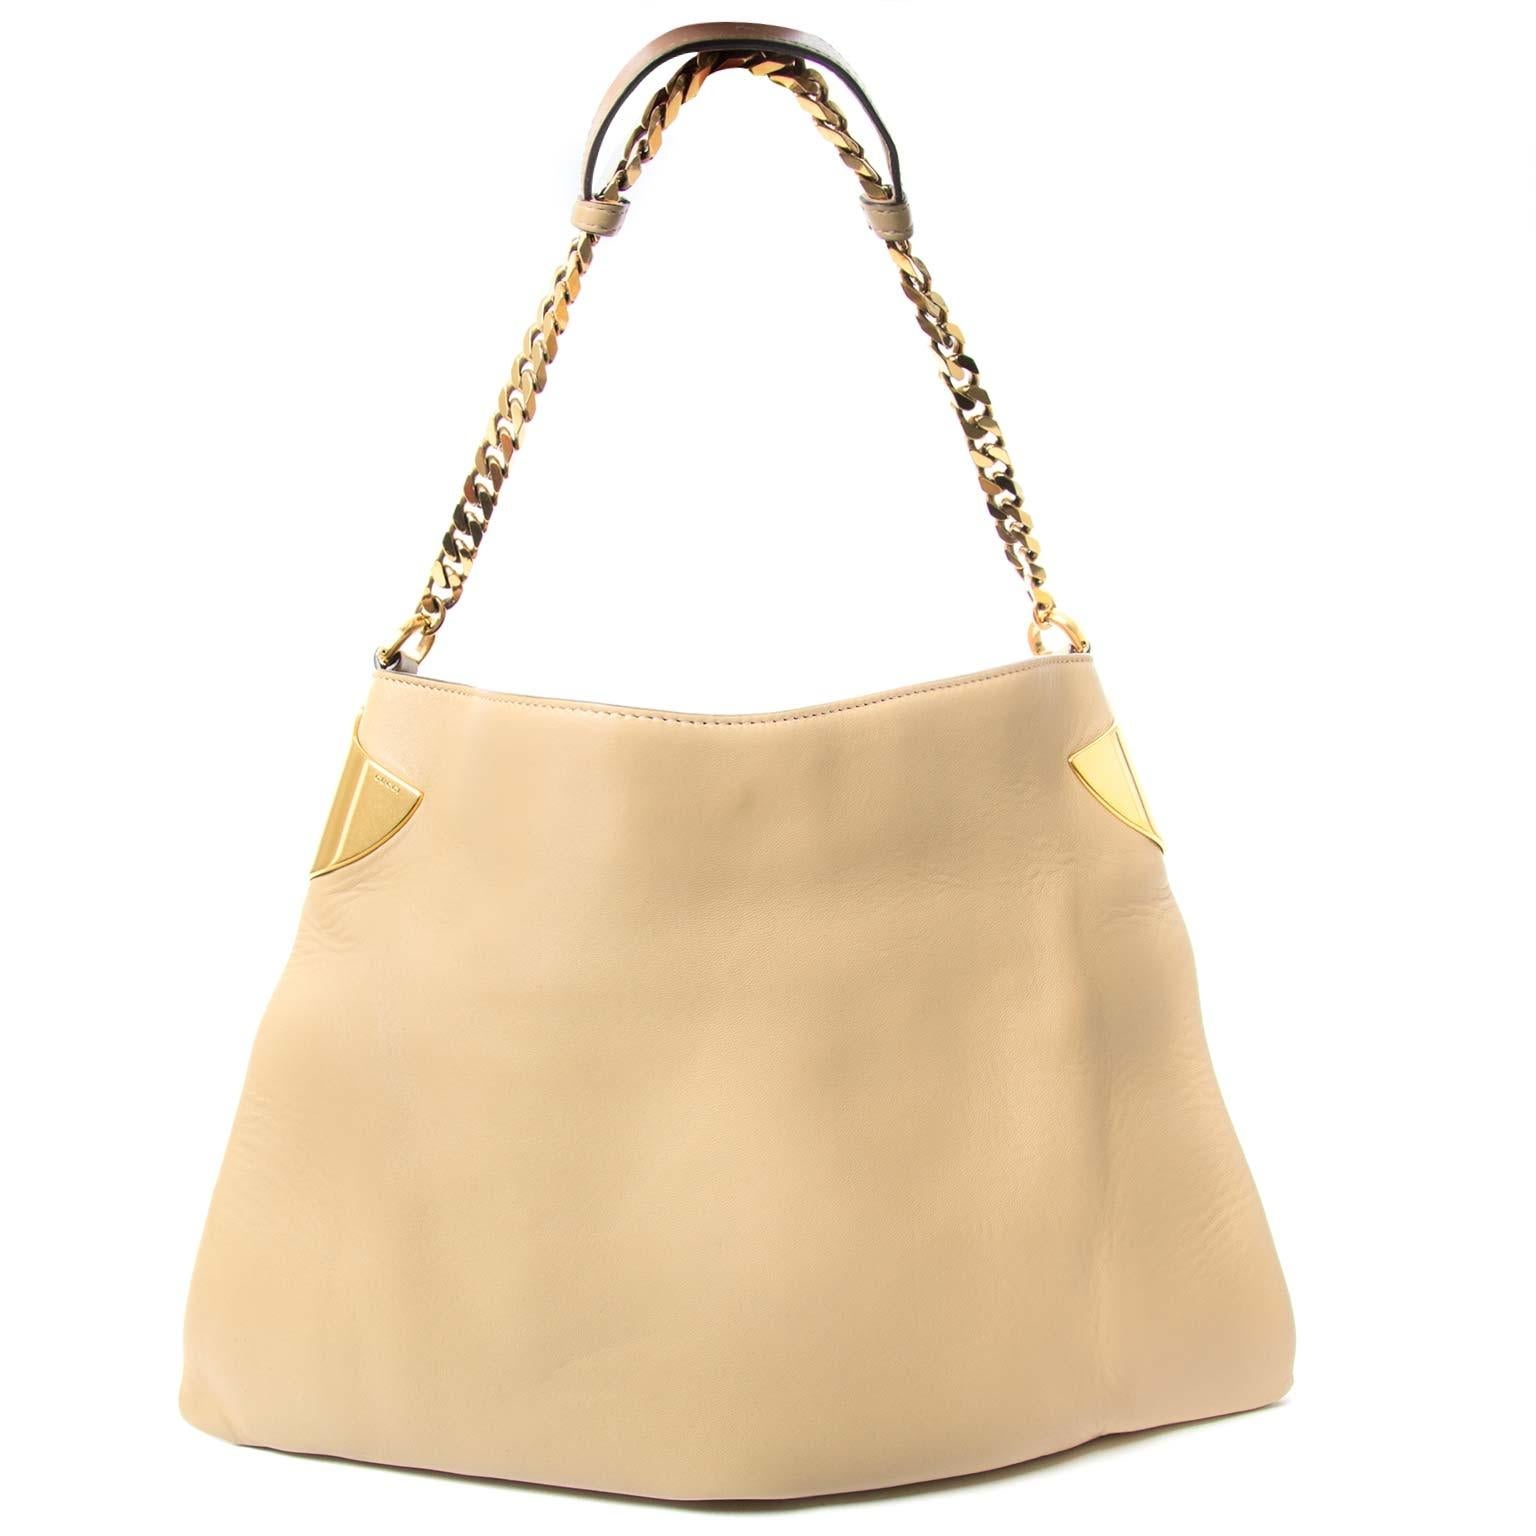 Gucci Beige Leather 1970 Handbag  In Excellent Condition For Sale In Antwerp, BE